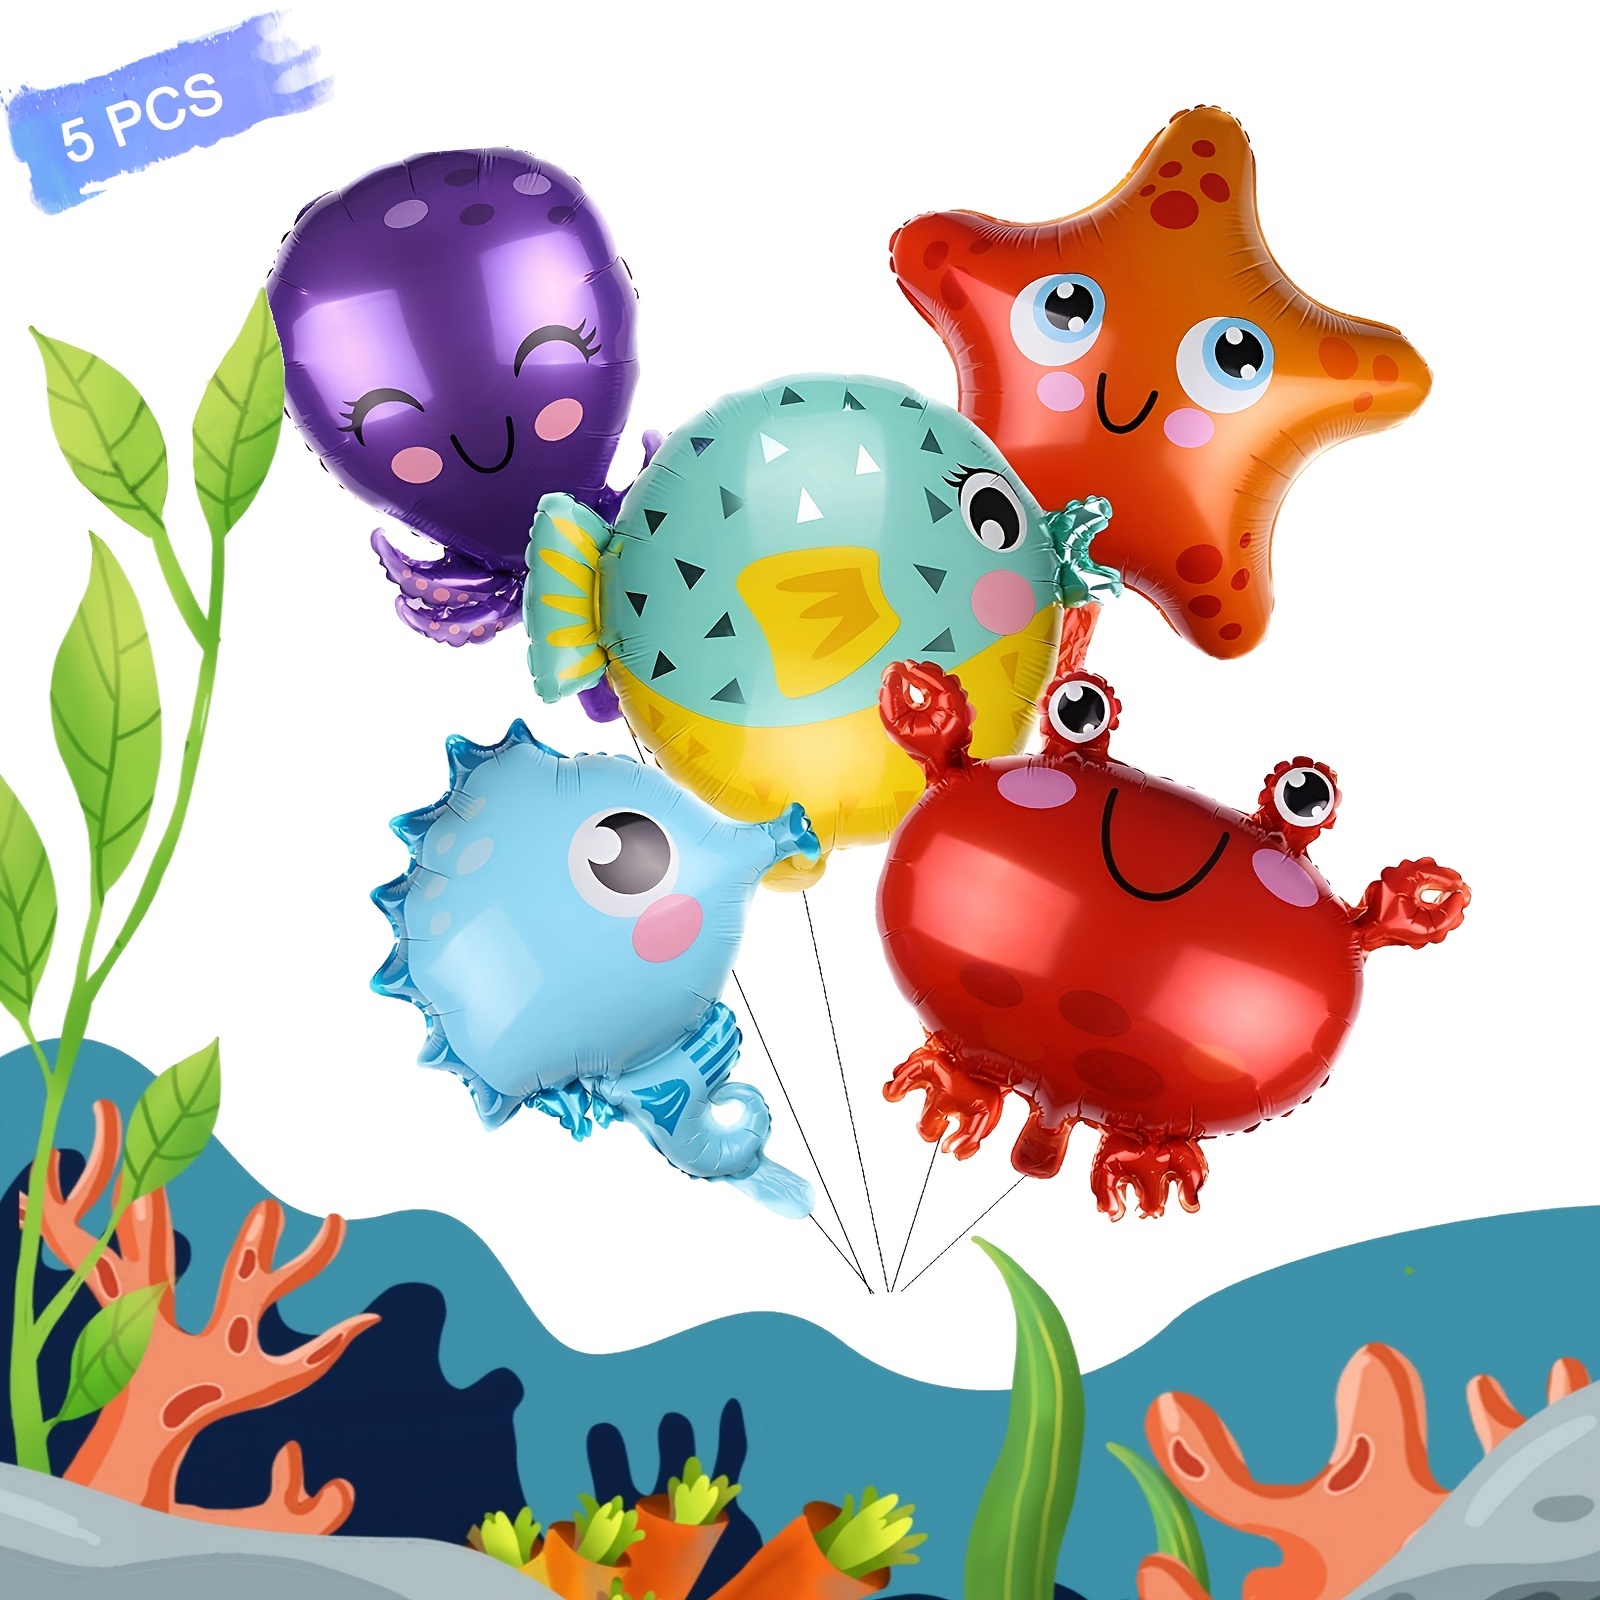 5pcs, Ocean Theme Party Balloon Decoration - Cartoon Fish, Starfish,  Octopus, Seahorse, and Crab Foil Balloons for Birthday Parties, Weddings,  Family